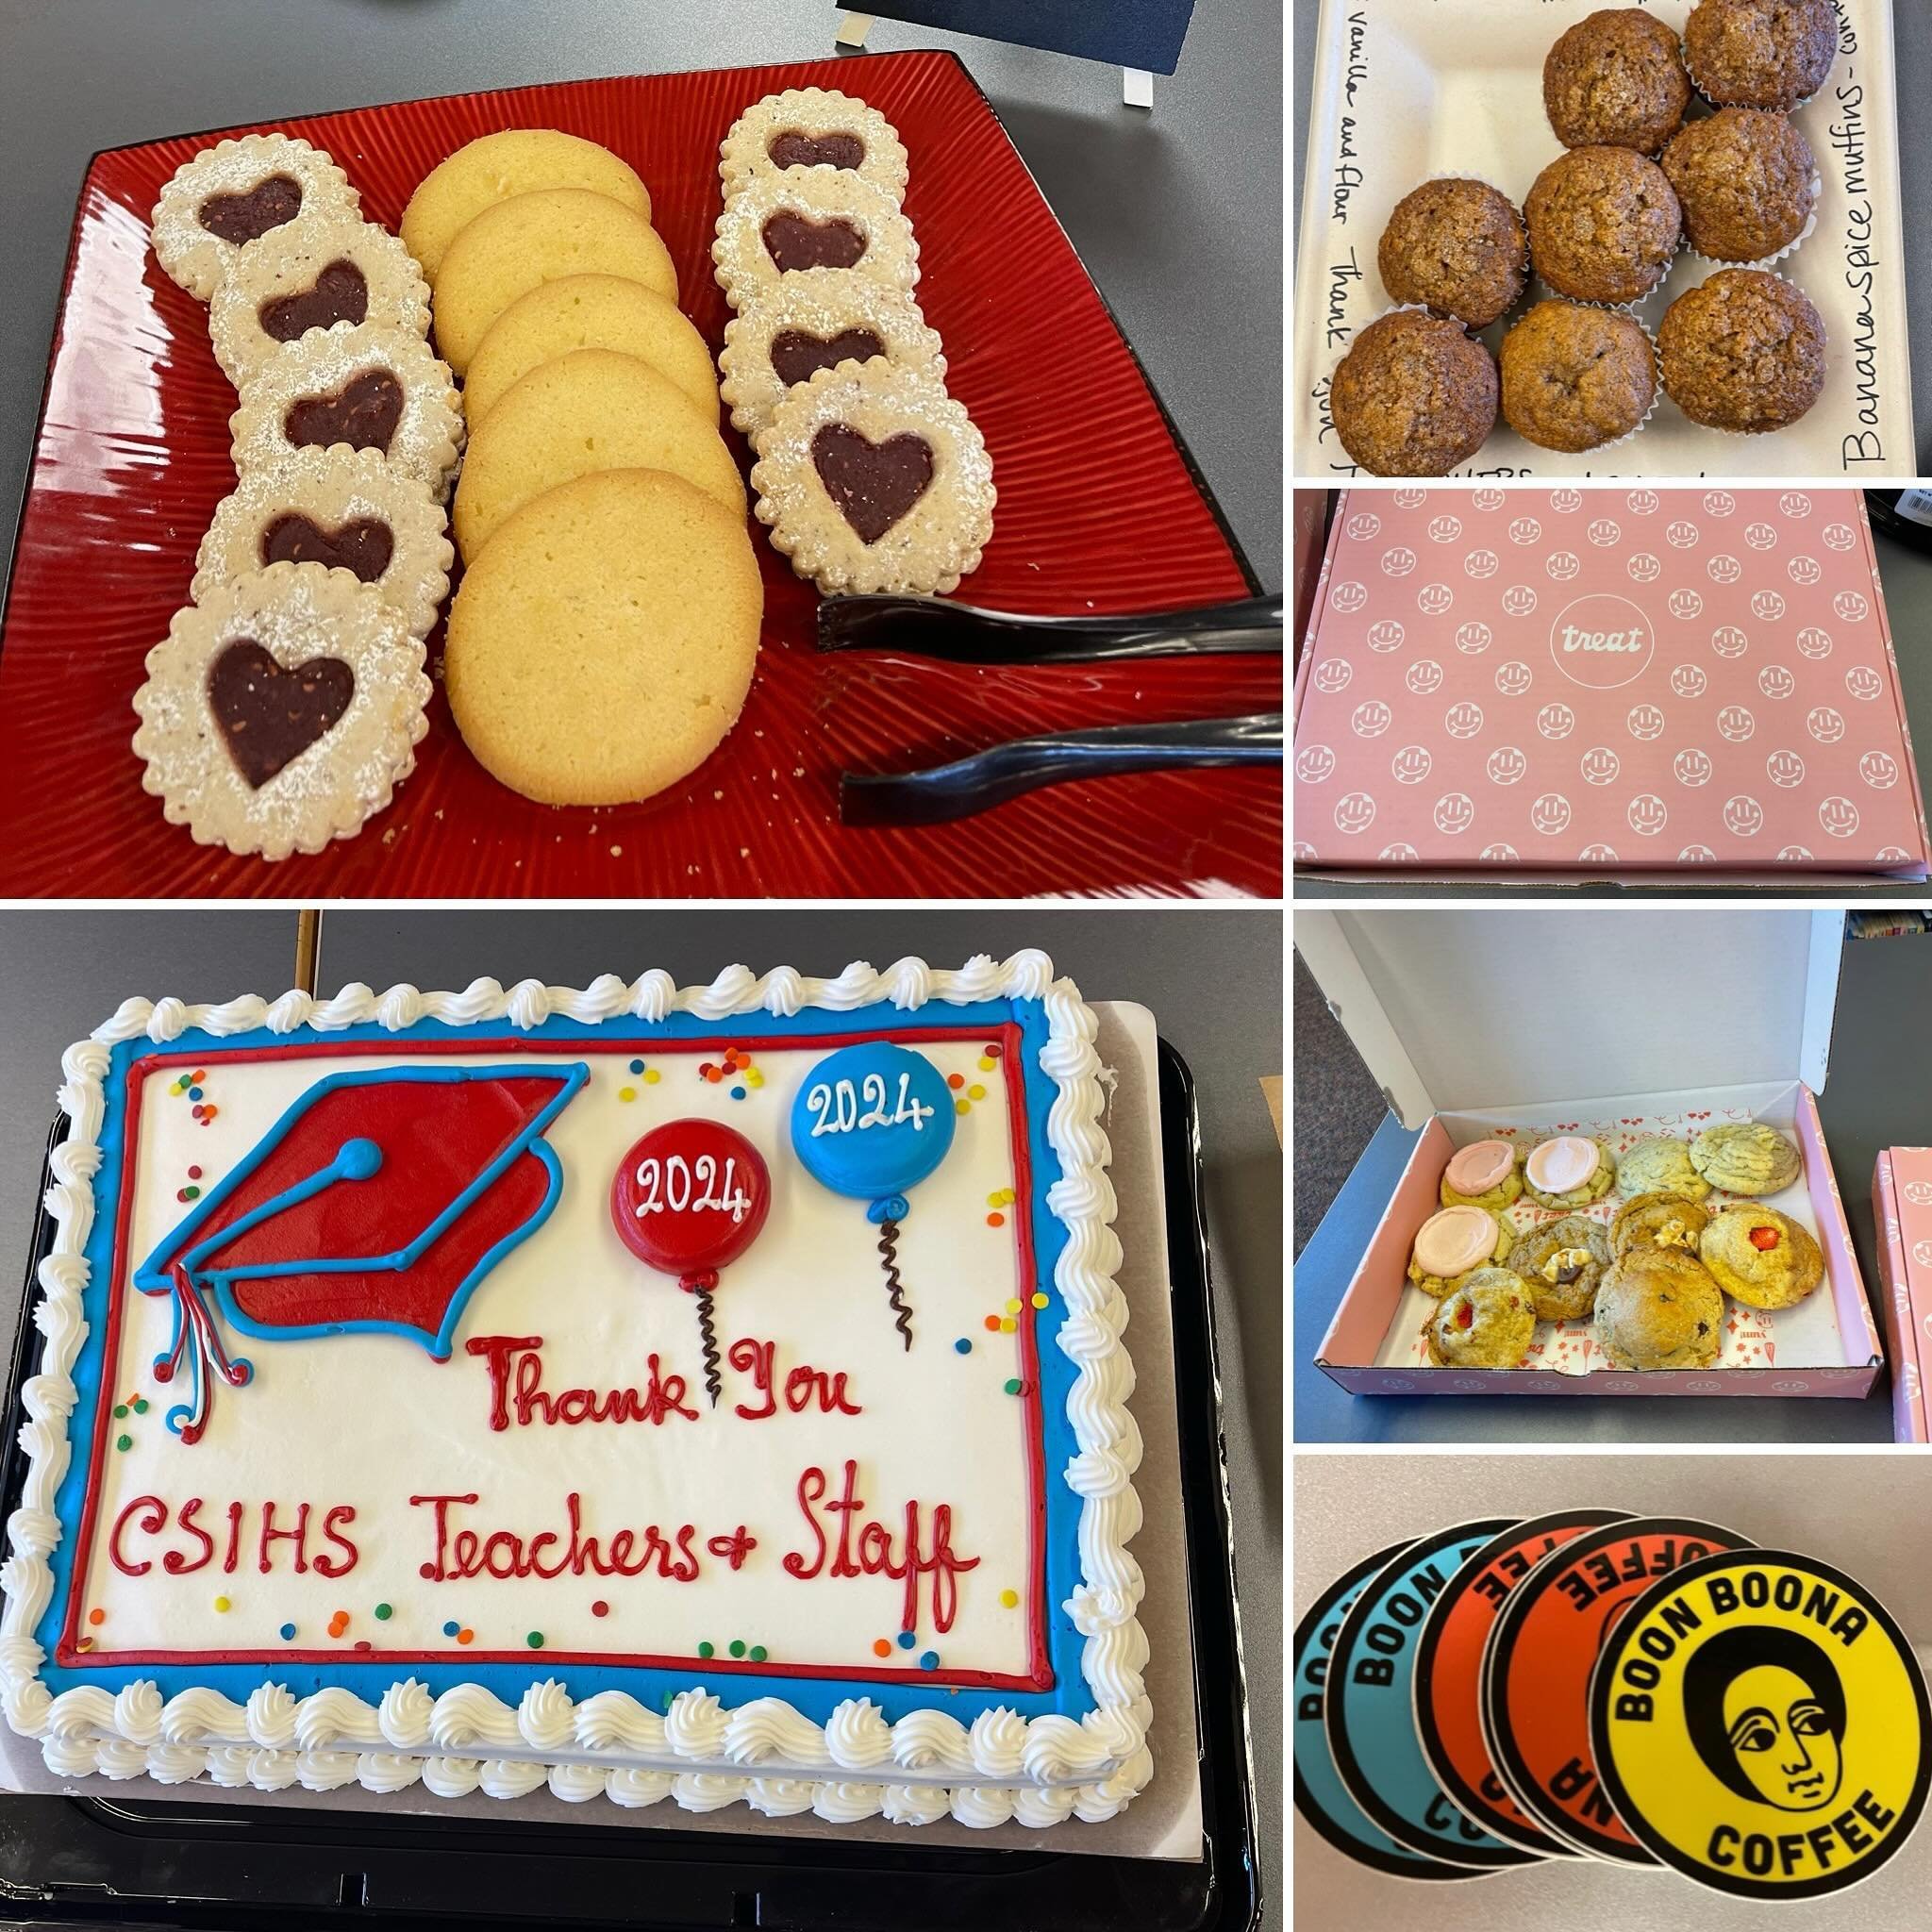 Ending Teacher &amp; Staff Appreciation Week in a very sweet way - with lots of delicious desserts and treats! Thanks again to all who donated their time and talents, and to our teachers for being there for our kids! Have a great weekend 💙❤️